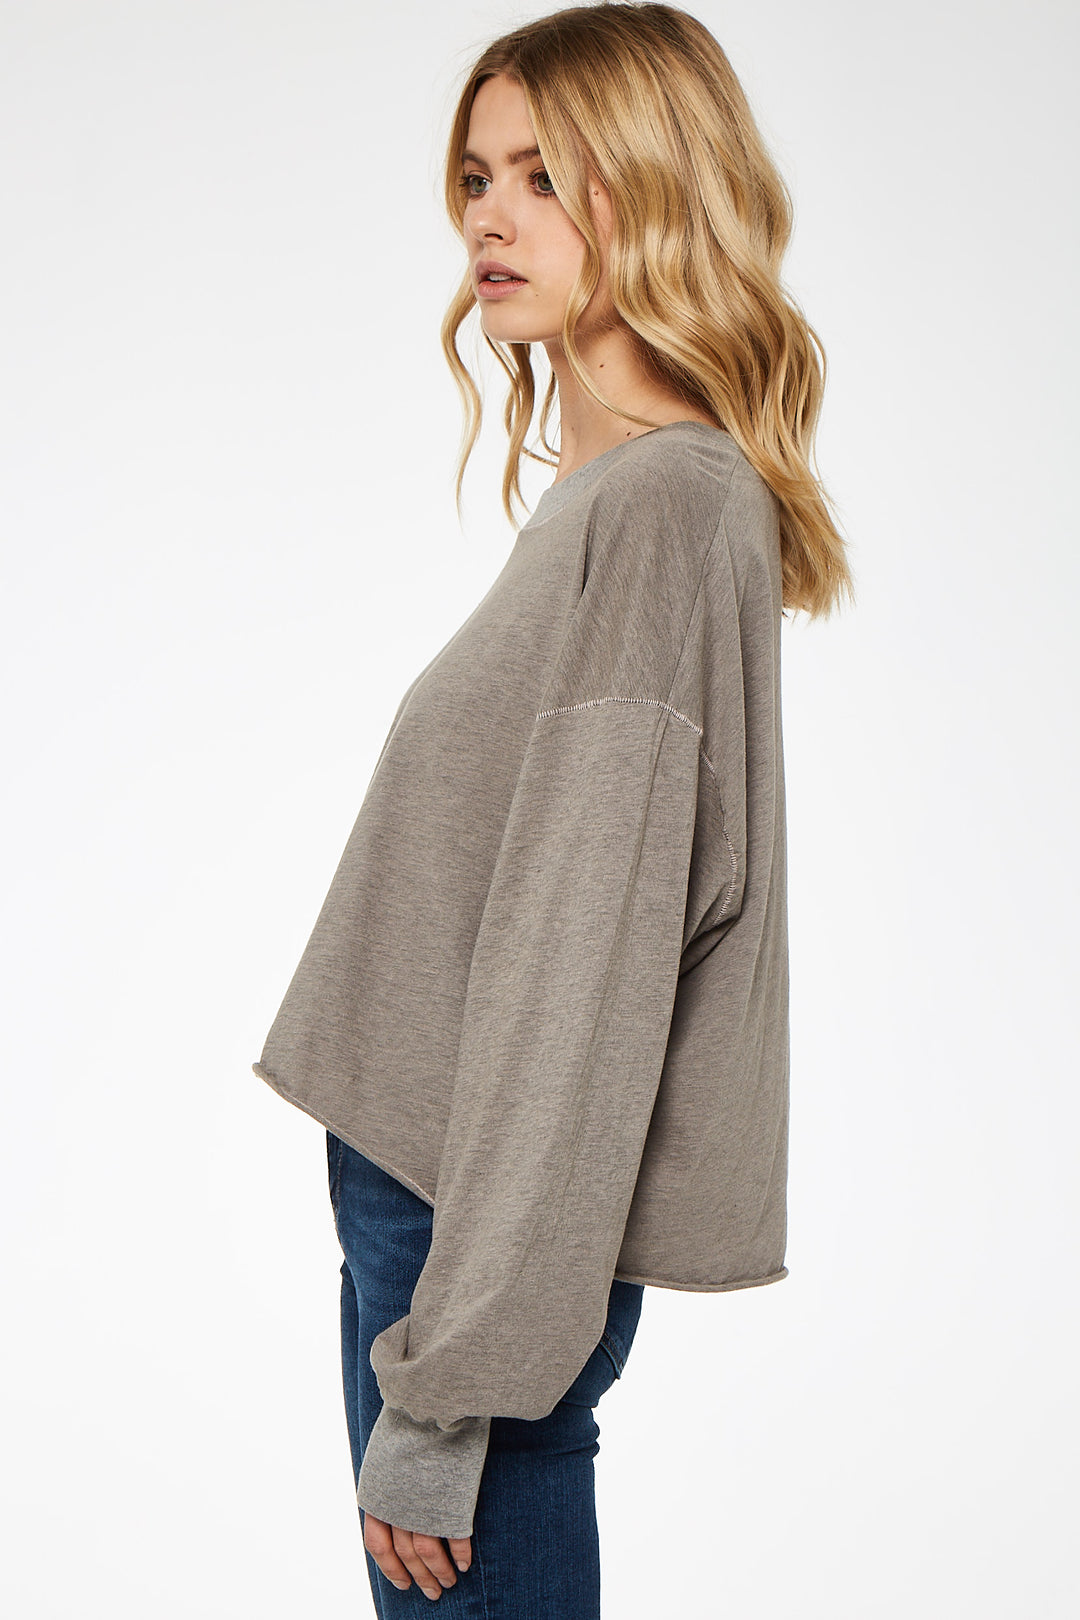 AXEL SLOUCHY TOP - Kingfisher Road - Online Boutique